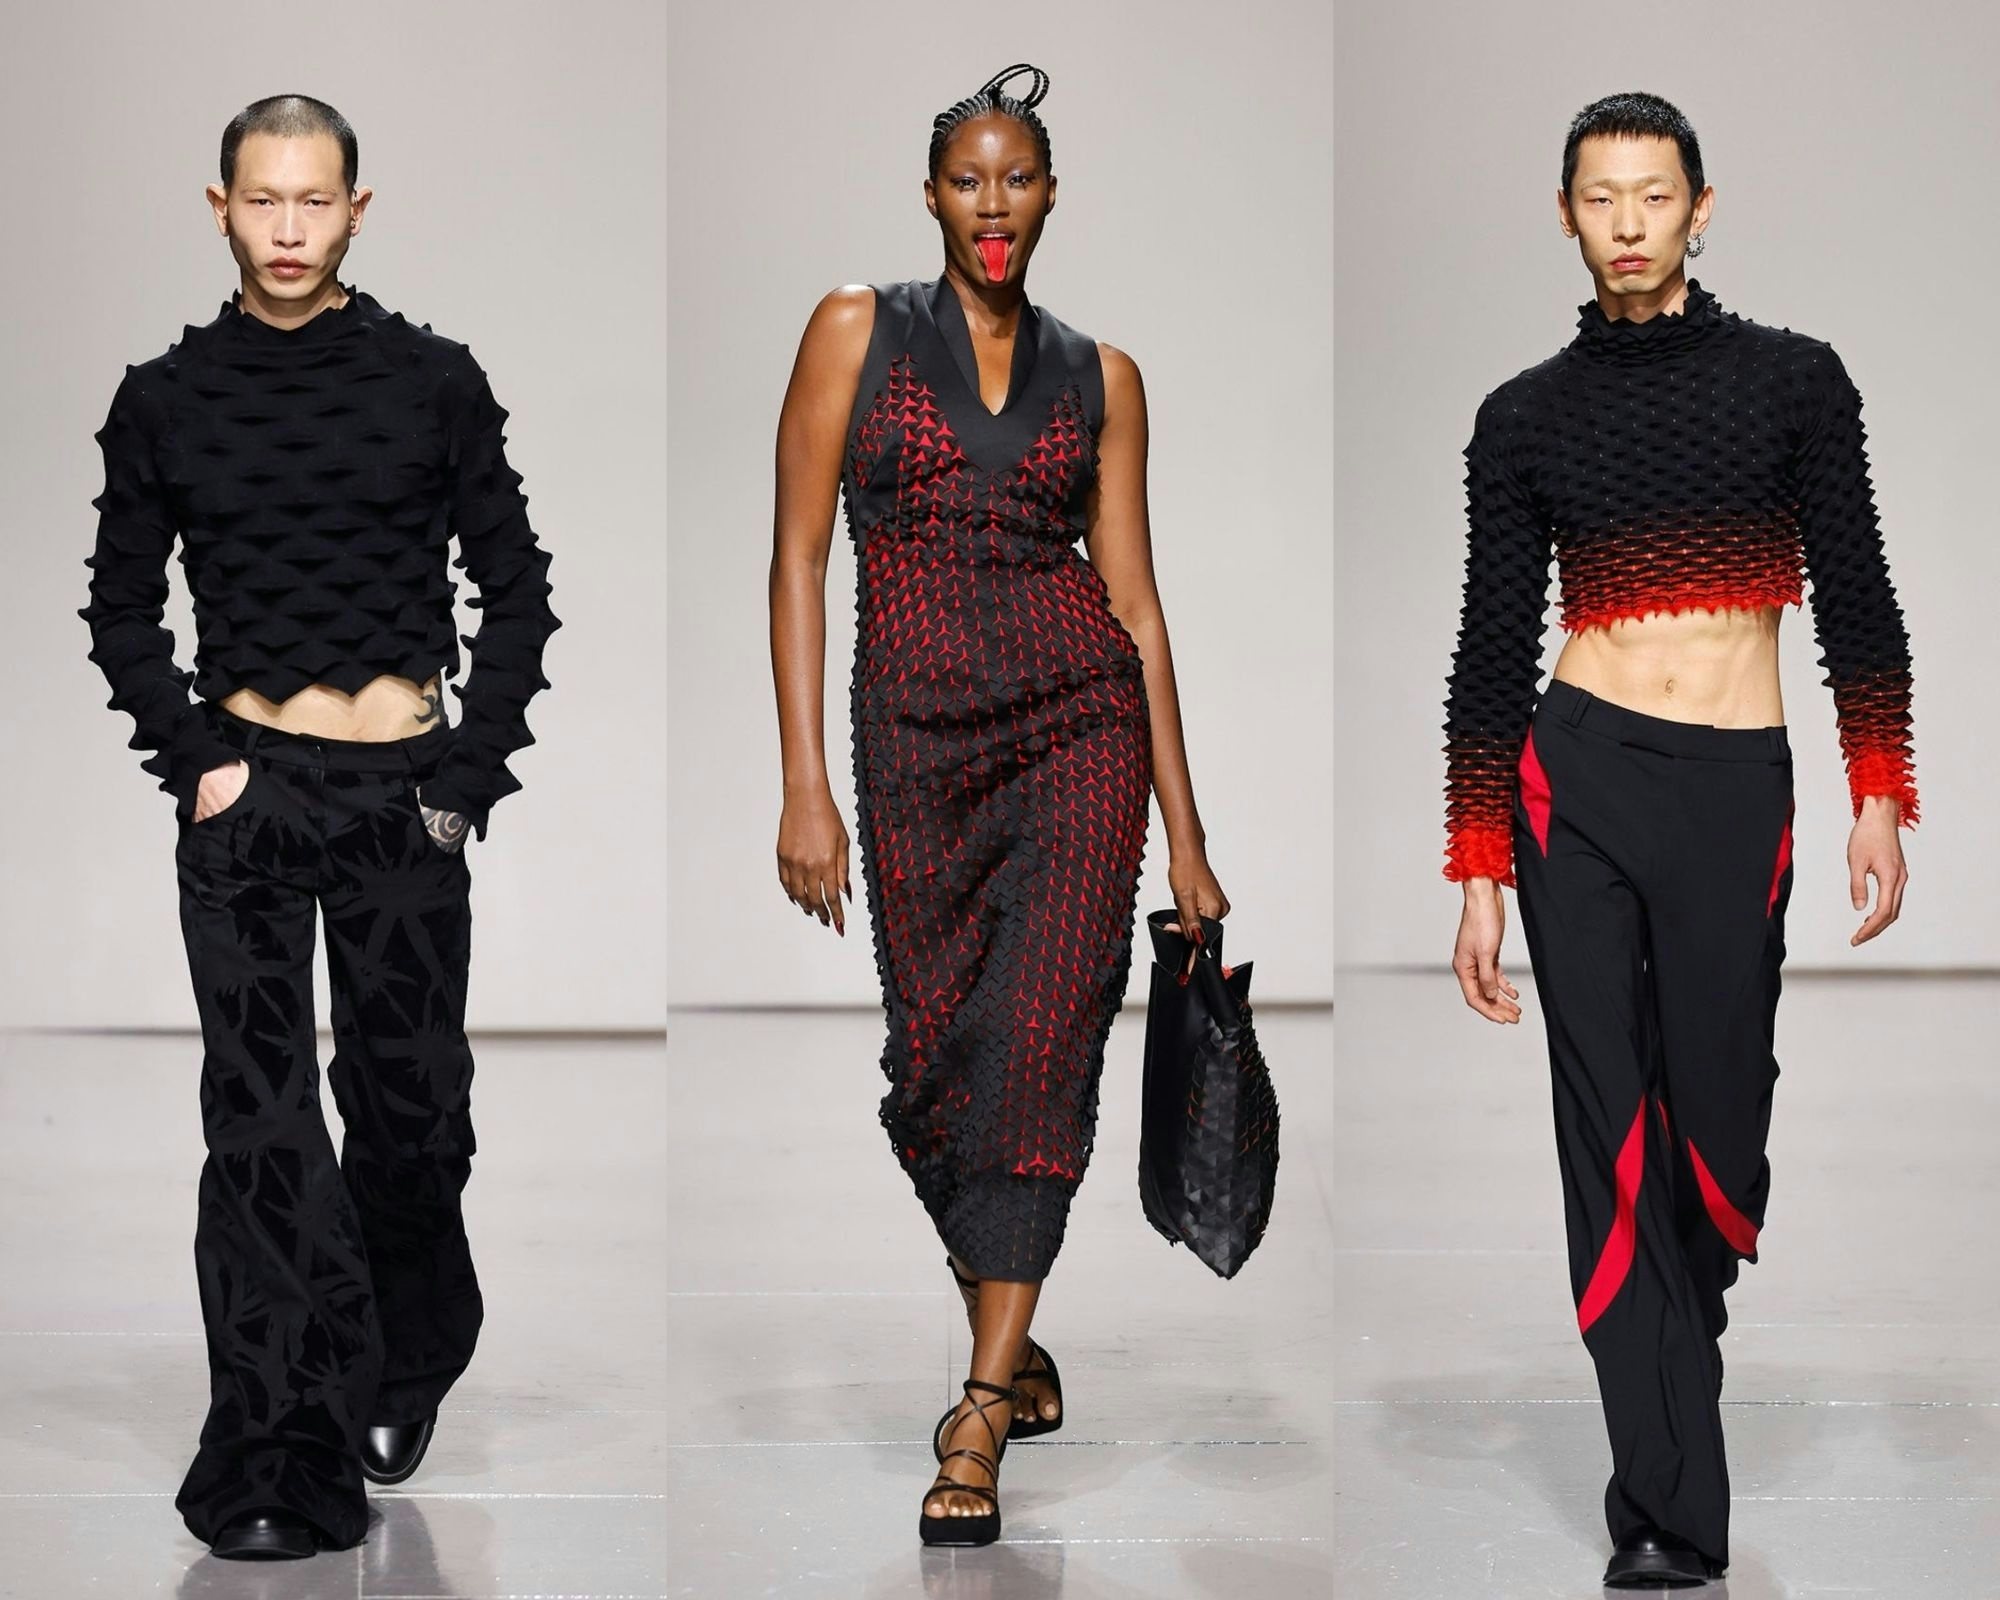 Punkish Asian American brand Chet Lo's collection sported its signature spikes. Photo: Chet Lo